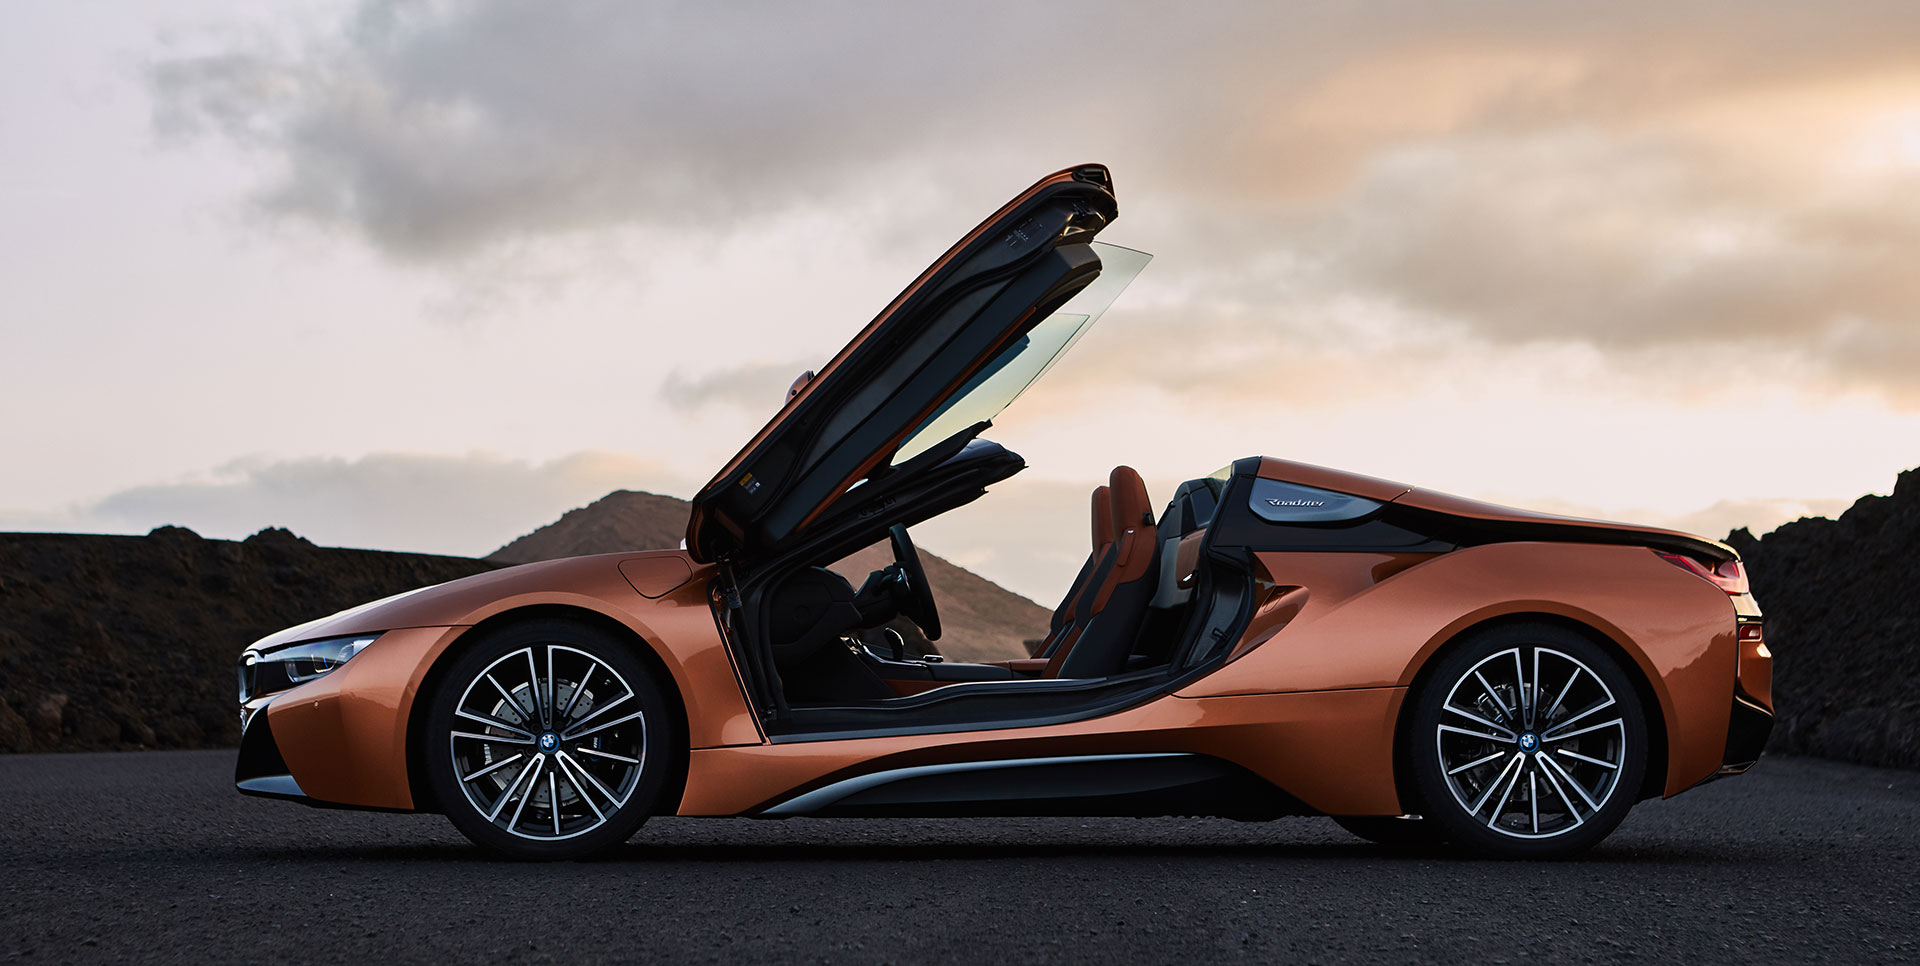 Bmw Magazine All About The New Bmw I8 Roadster The New Bmw I8 Coupe